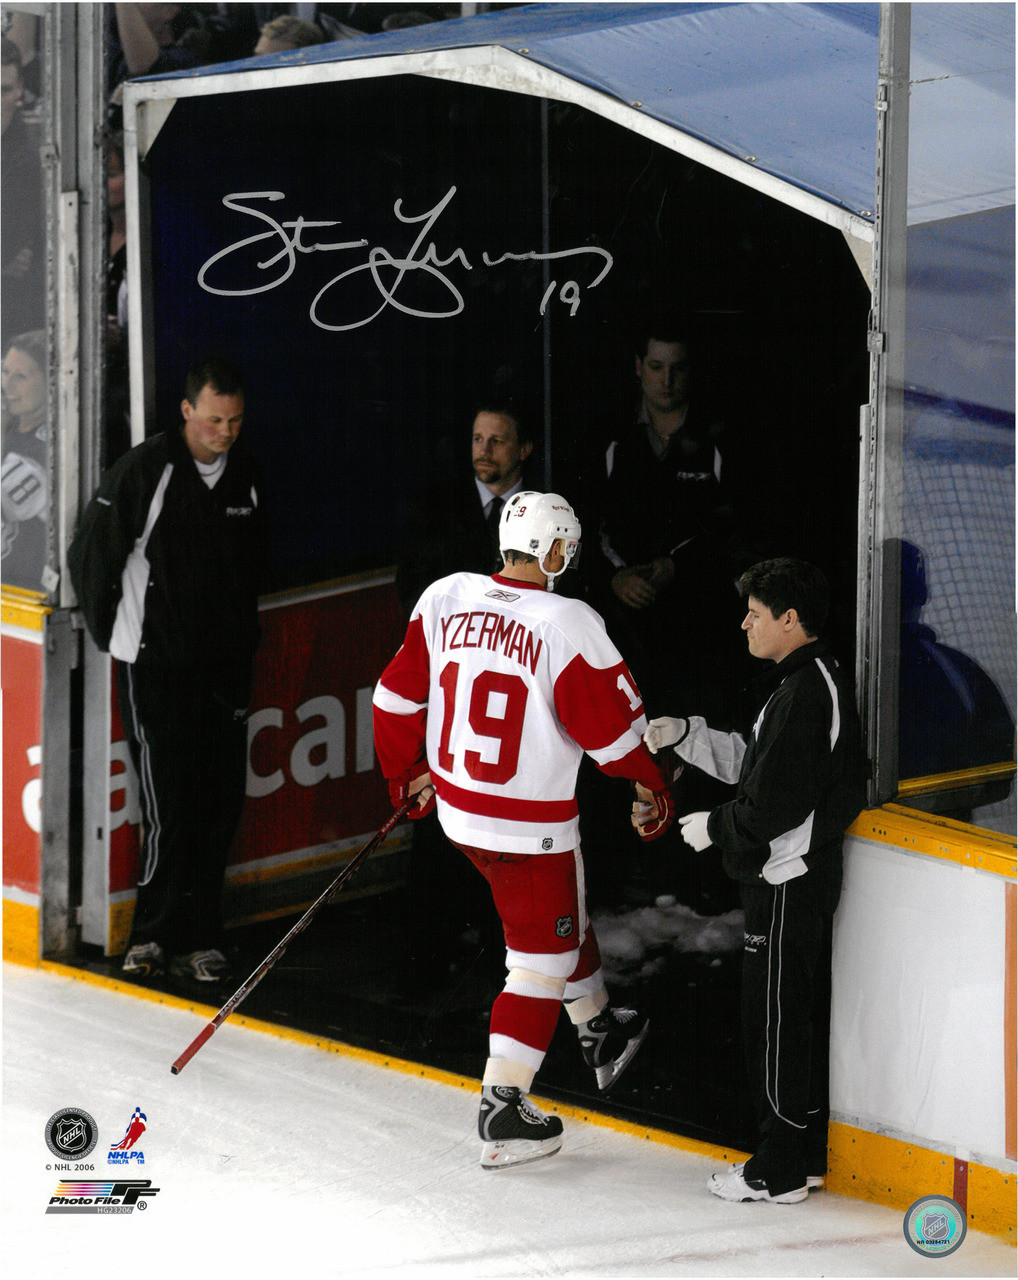 Steve Yzerman Peterborough Pete's Game Worn And Autographed Jersey